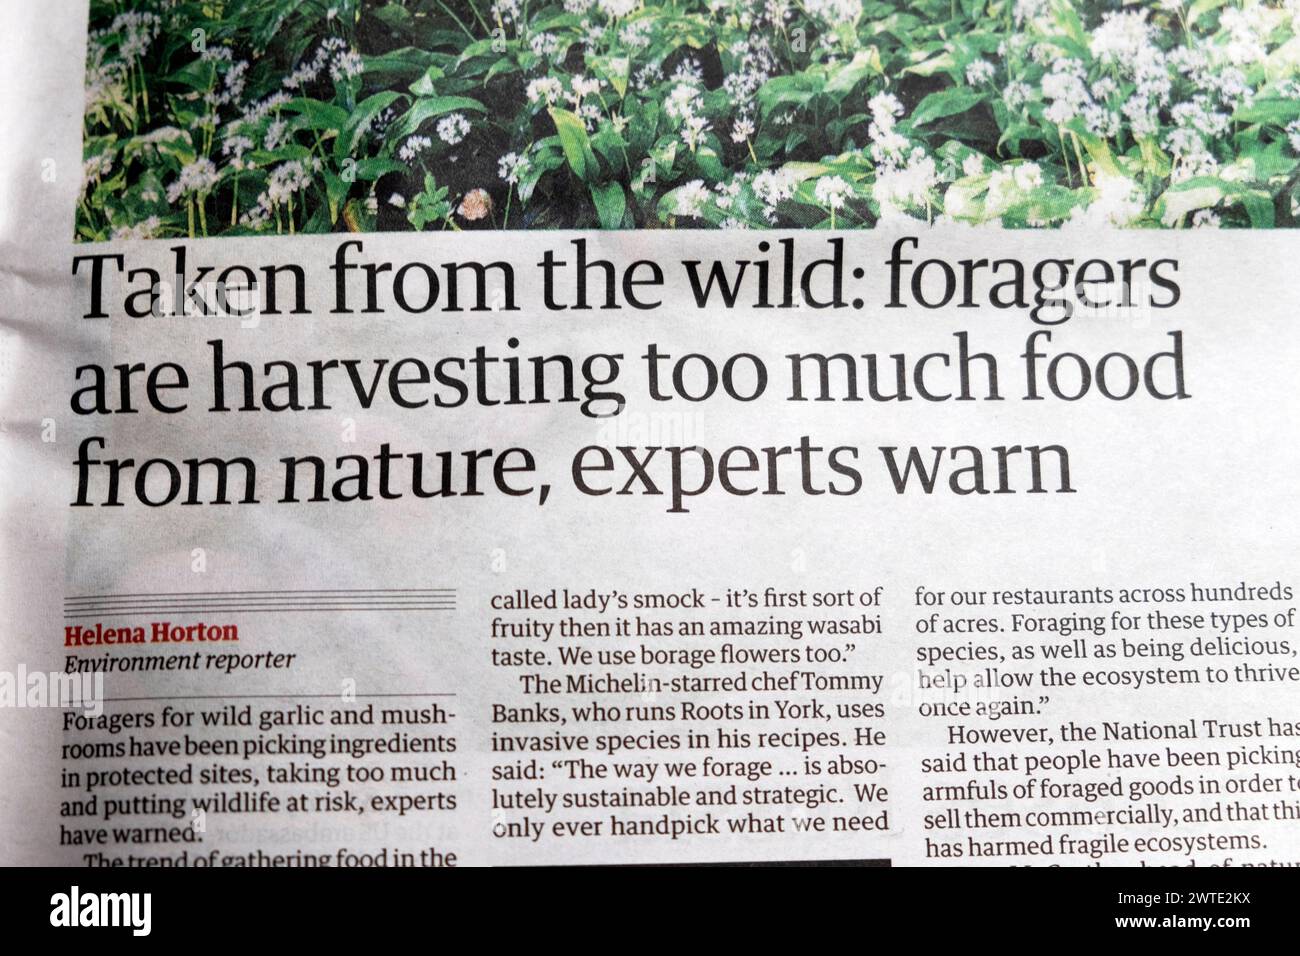 Plants 'Taken from the wild: foragers are harvesting too much food from nature, experts warn' Guardian newspaper headline foraging article Stock Photo